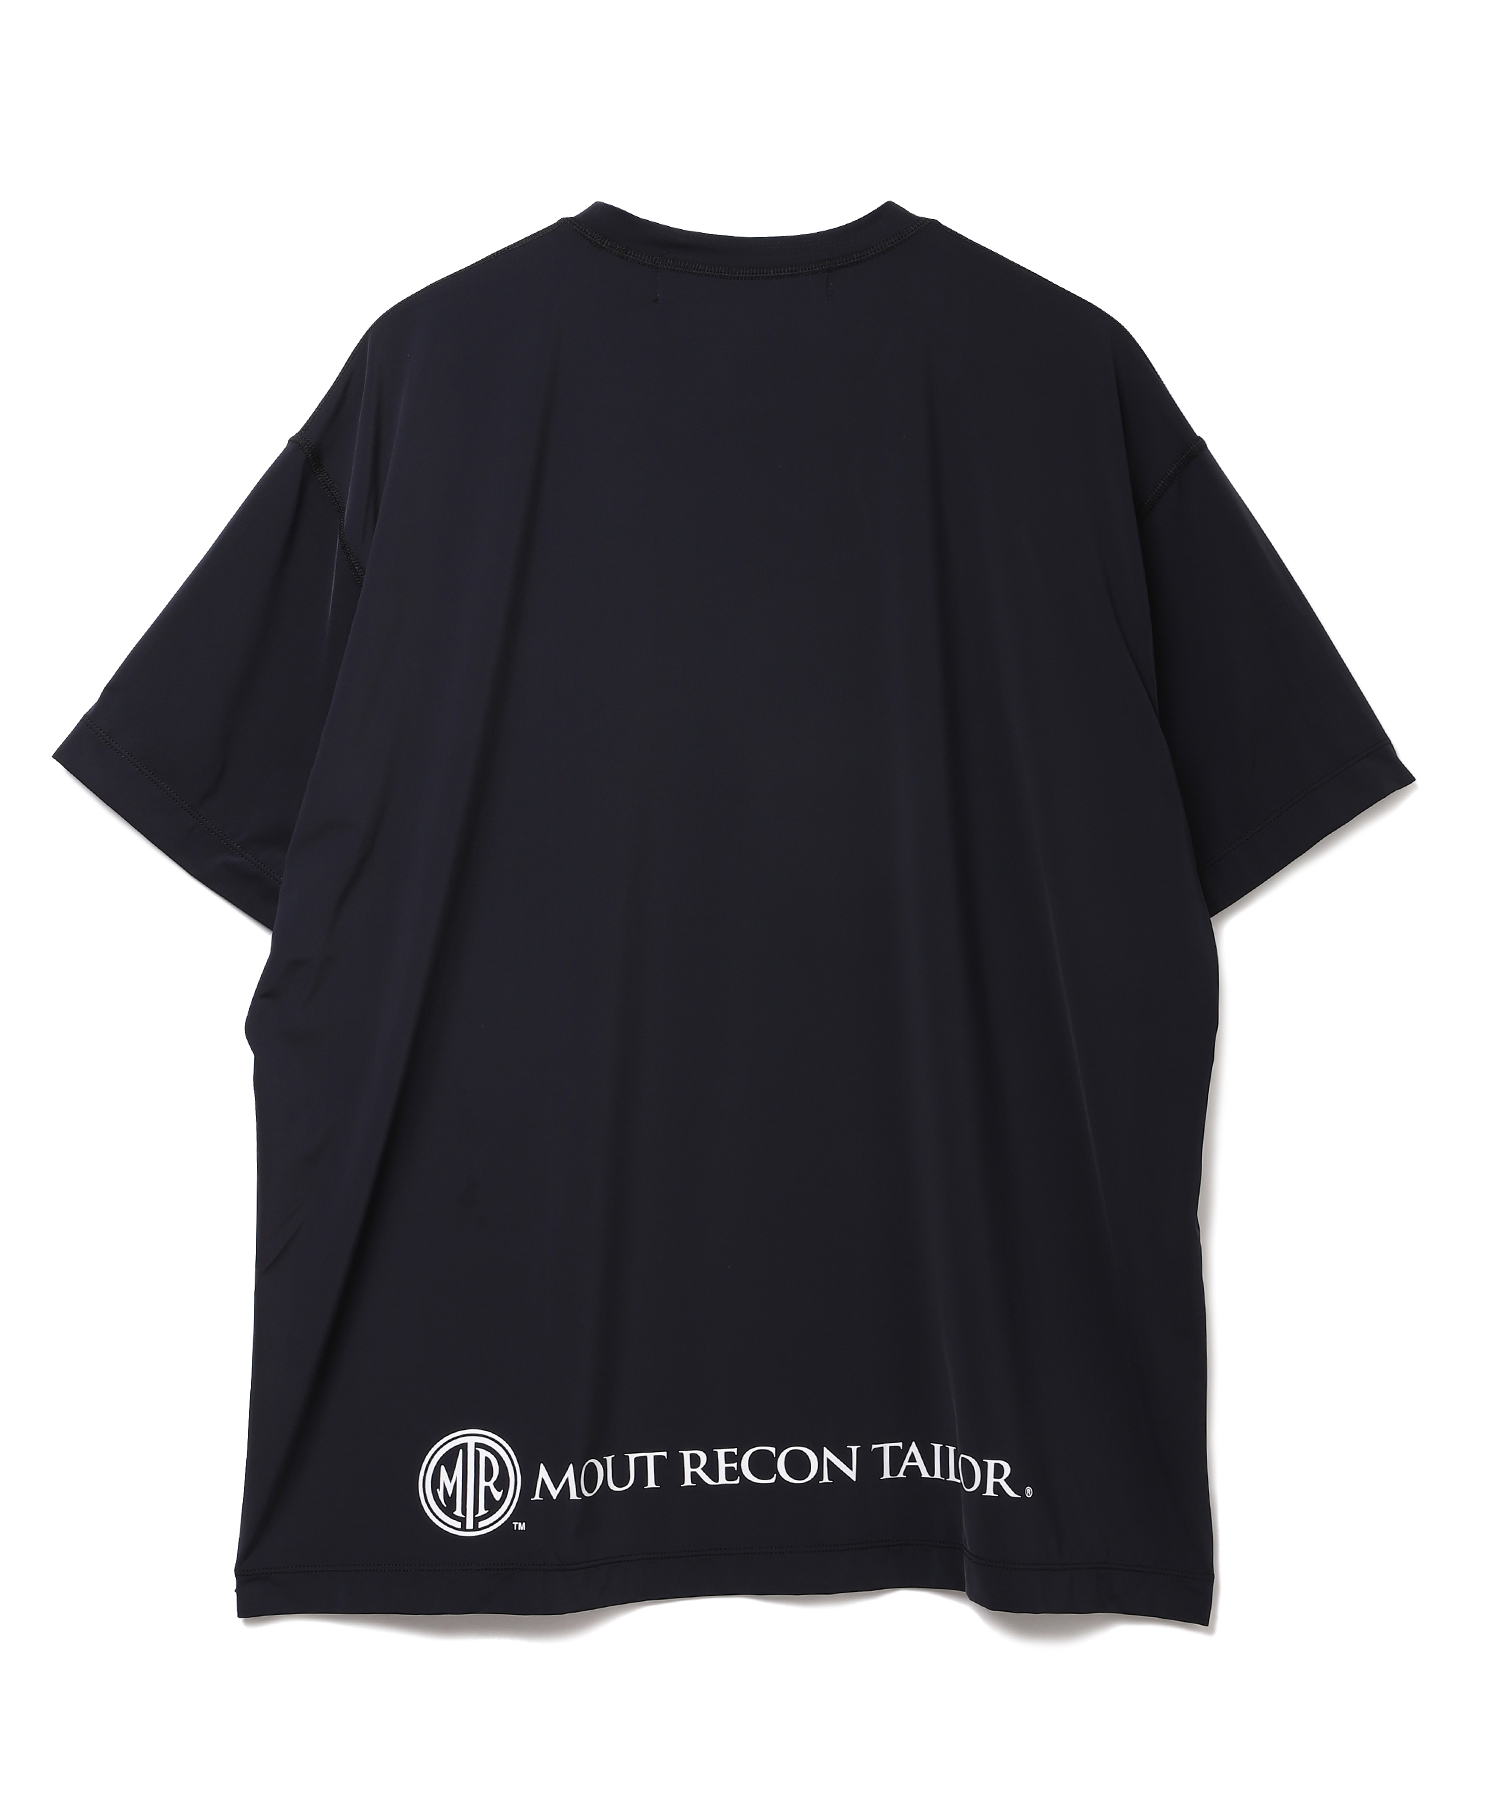 MOUT TRNG T-shirts（MOUT RECON TAILOR）｜TATRAS 